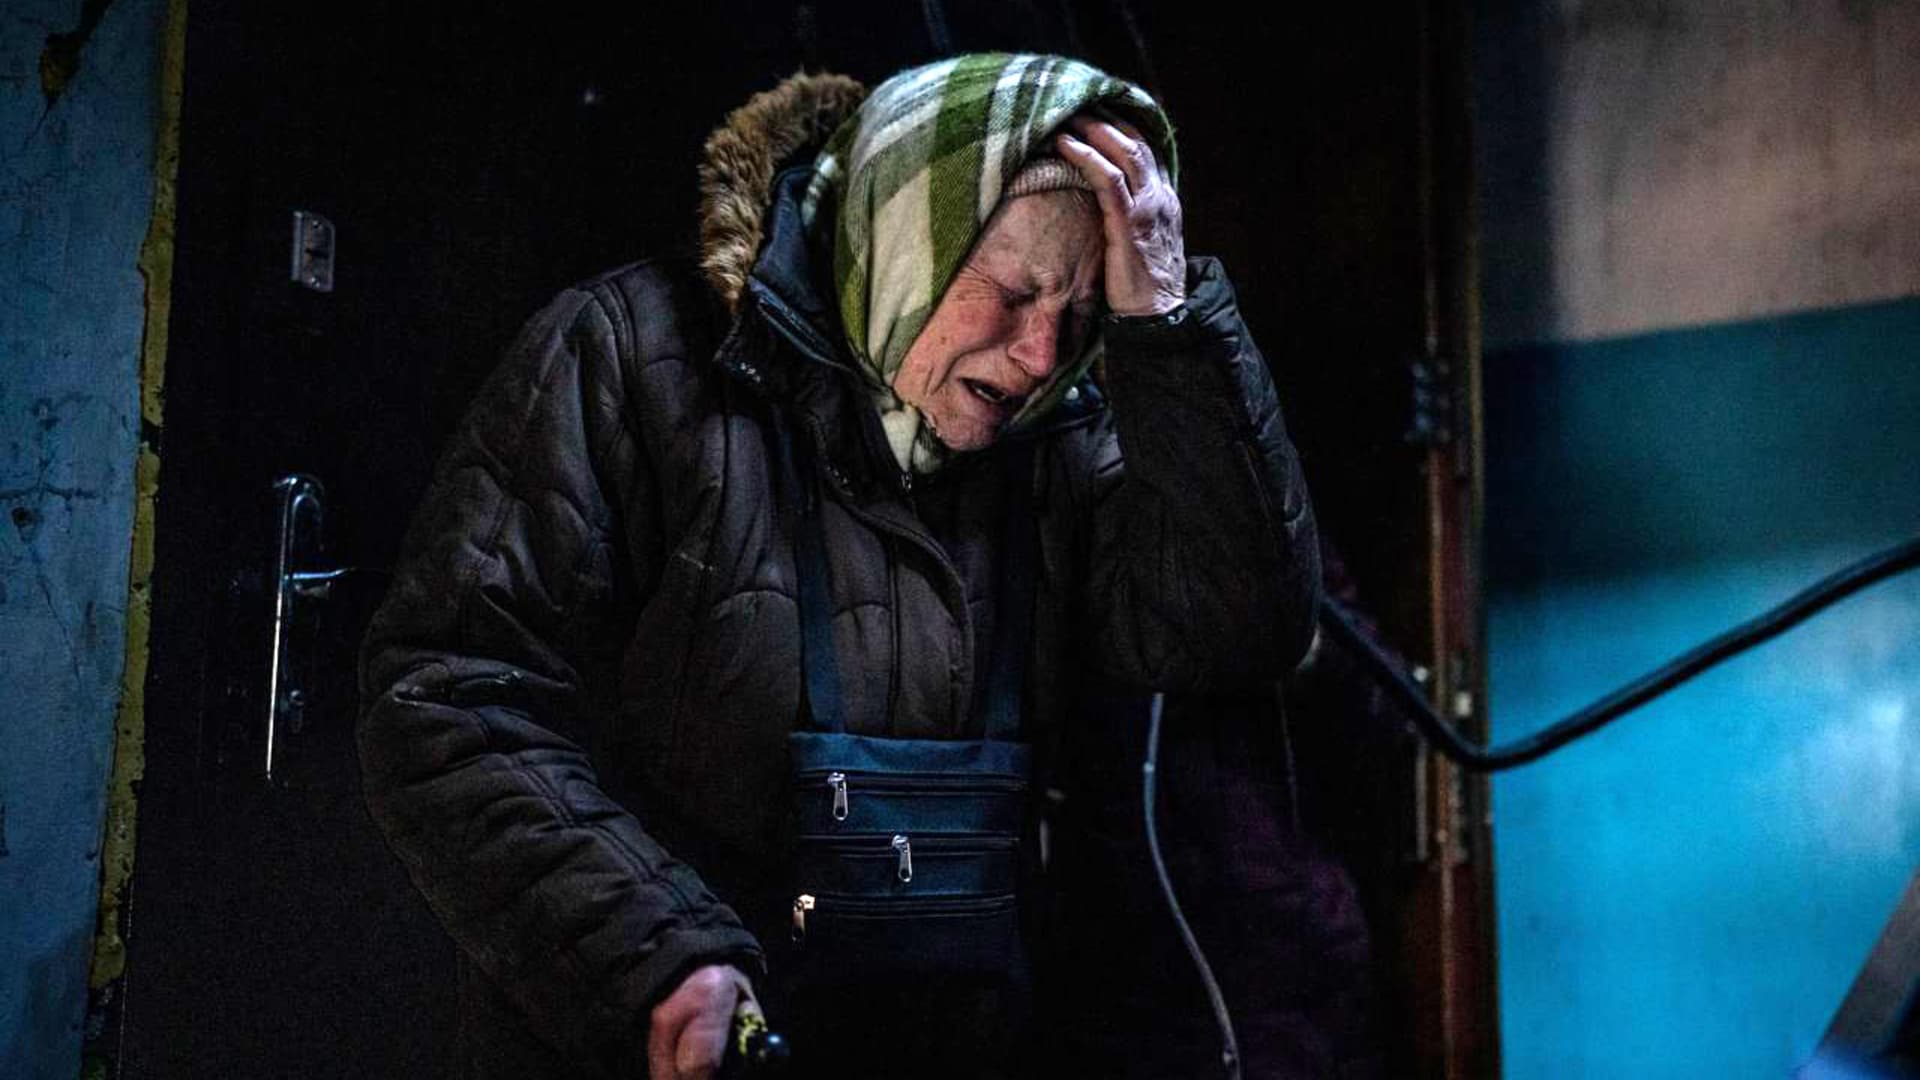 Alexandra, 86, cries after her apartment was destroyed by a Grad rocket attack in Kharkiv, Ukraine on March 15, 2022.